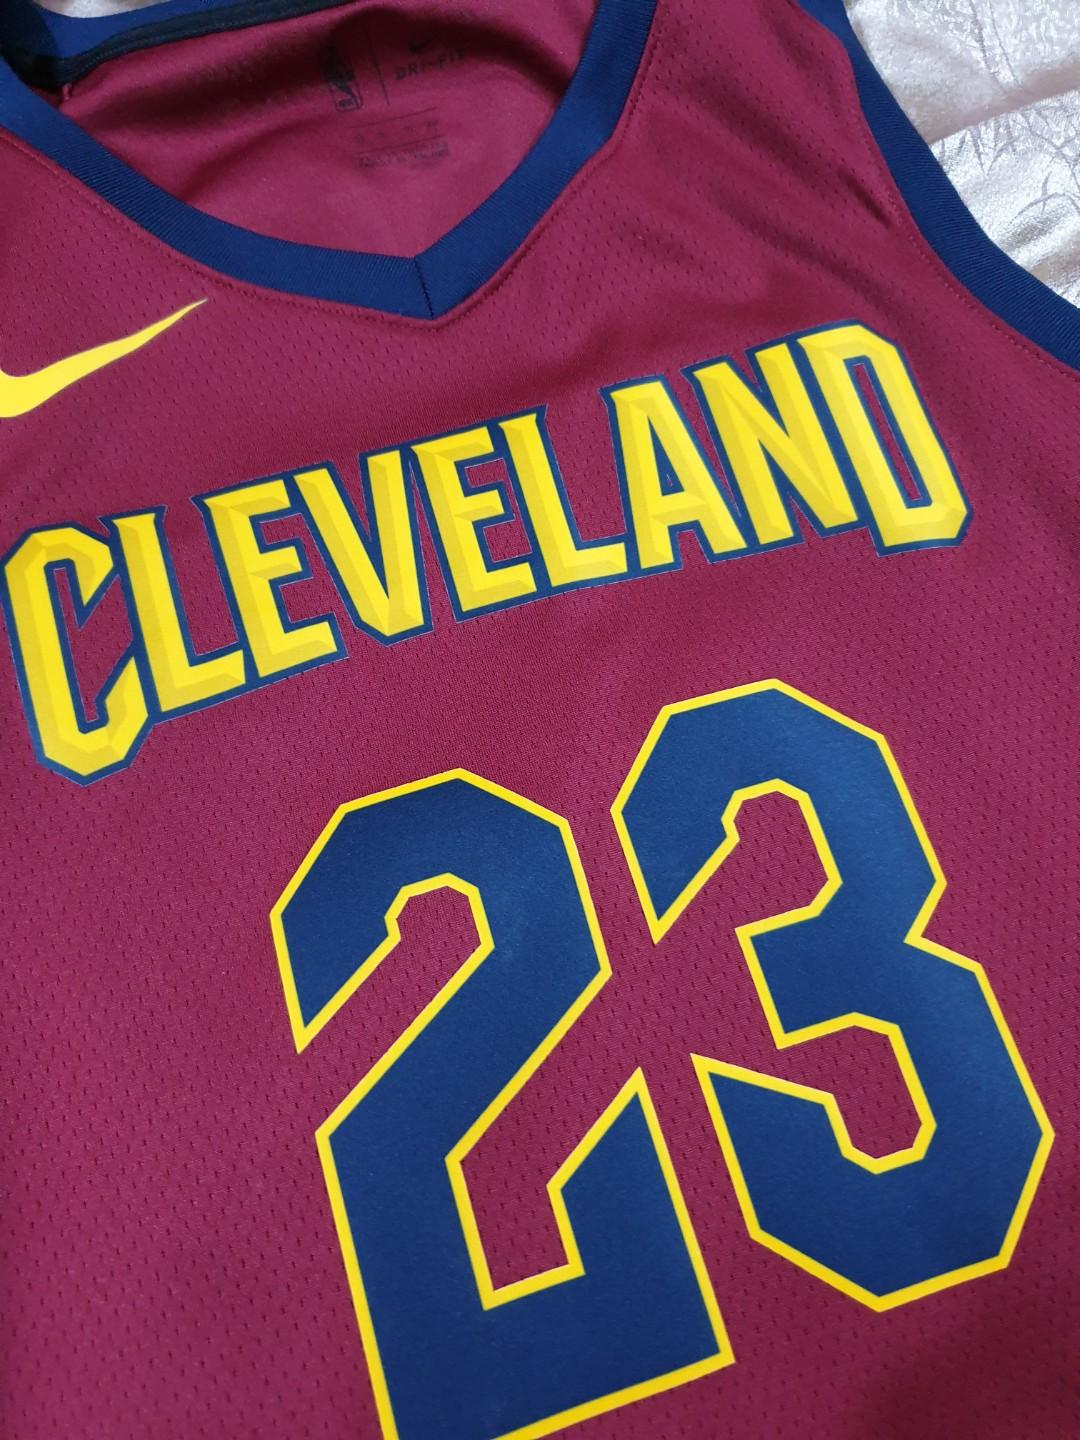 WOMENS Authentic Cleveland Cavaliers #23 LeBron James PINK NBA Basketball  Jersey